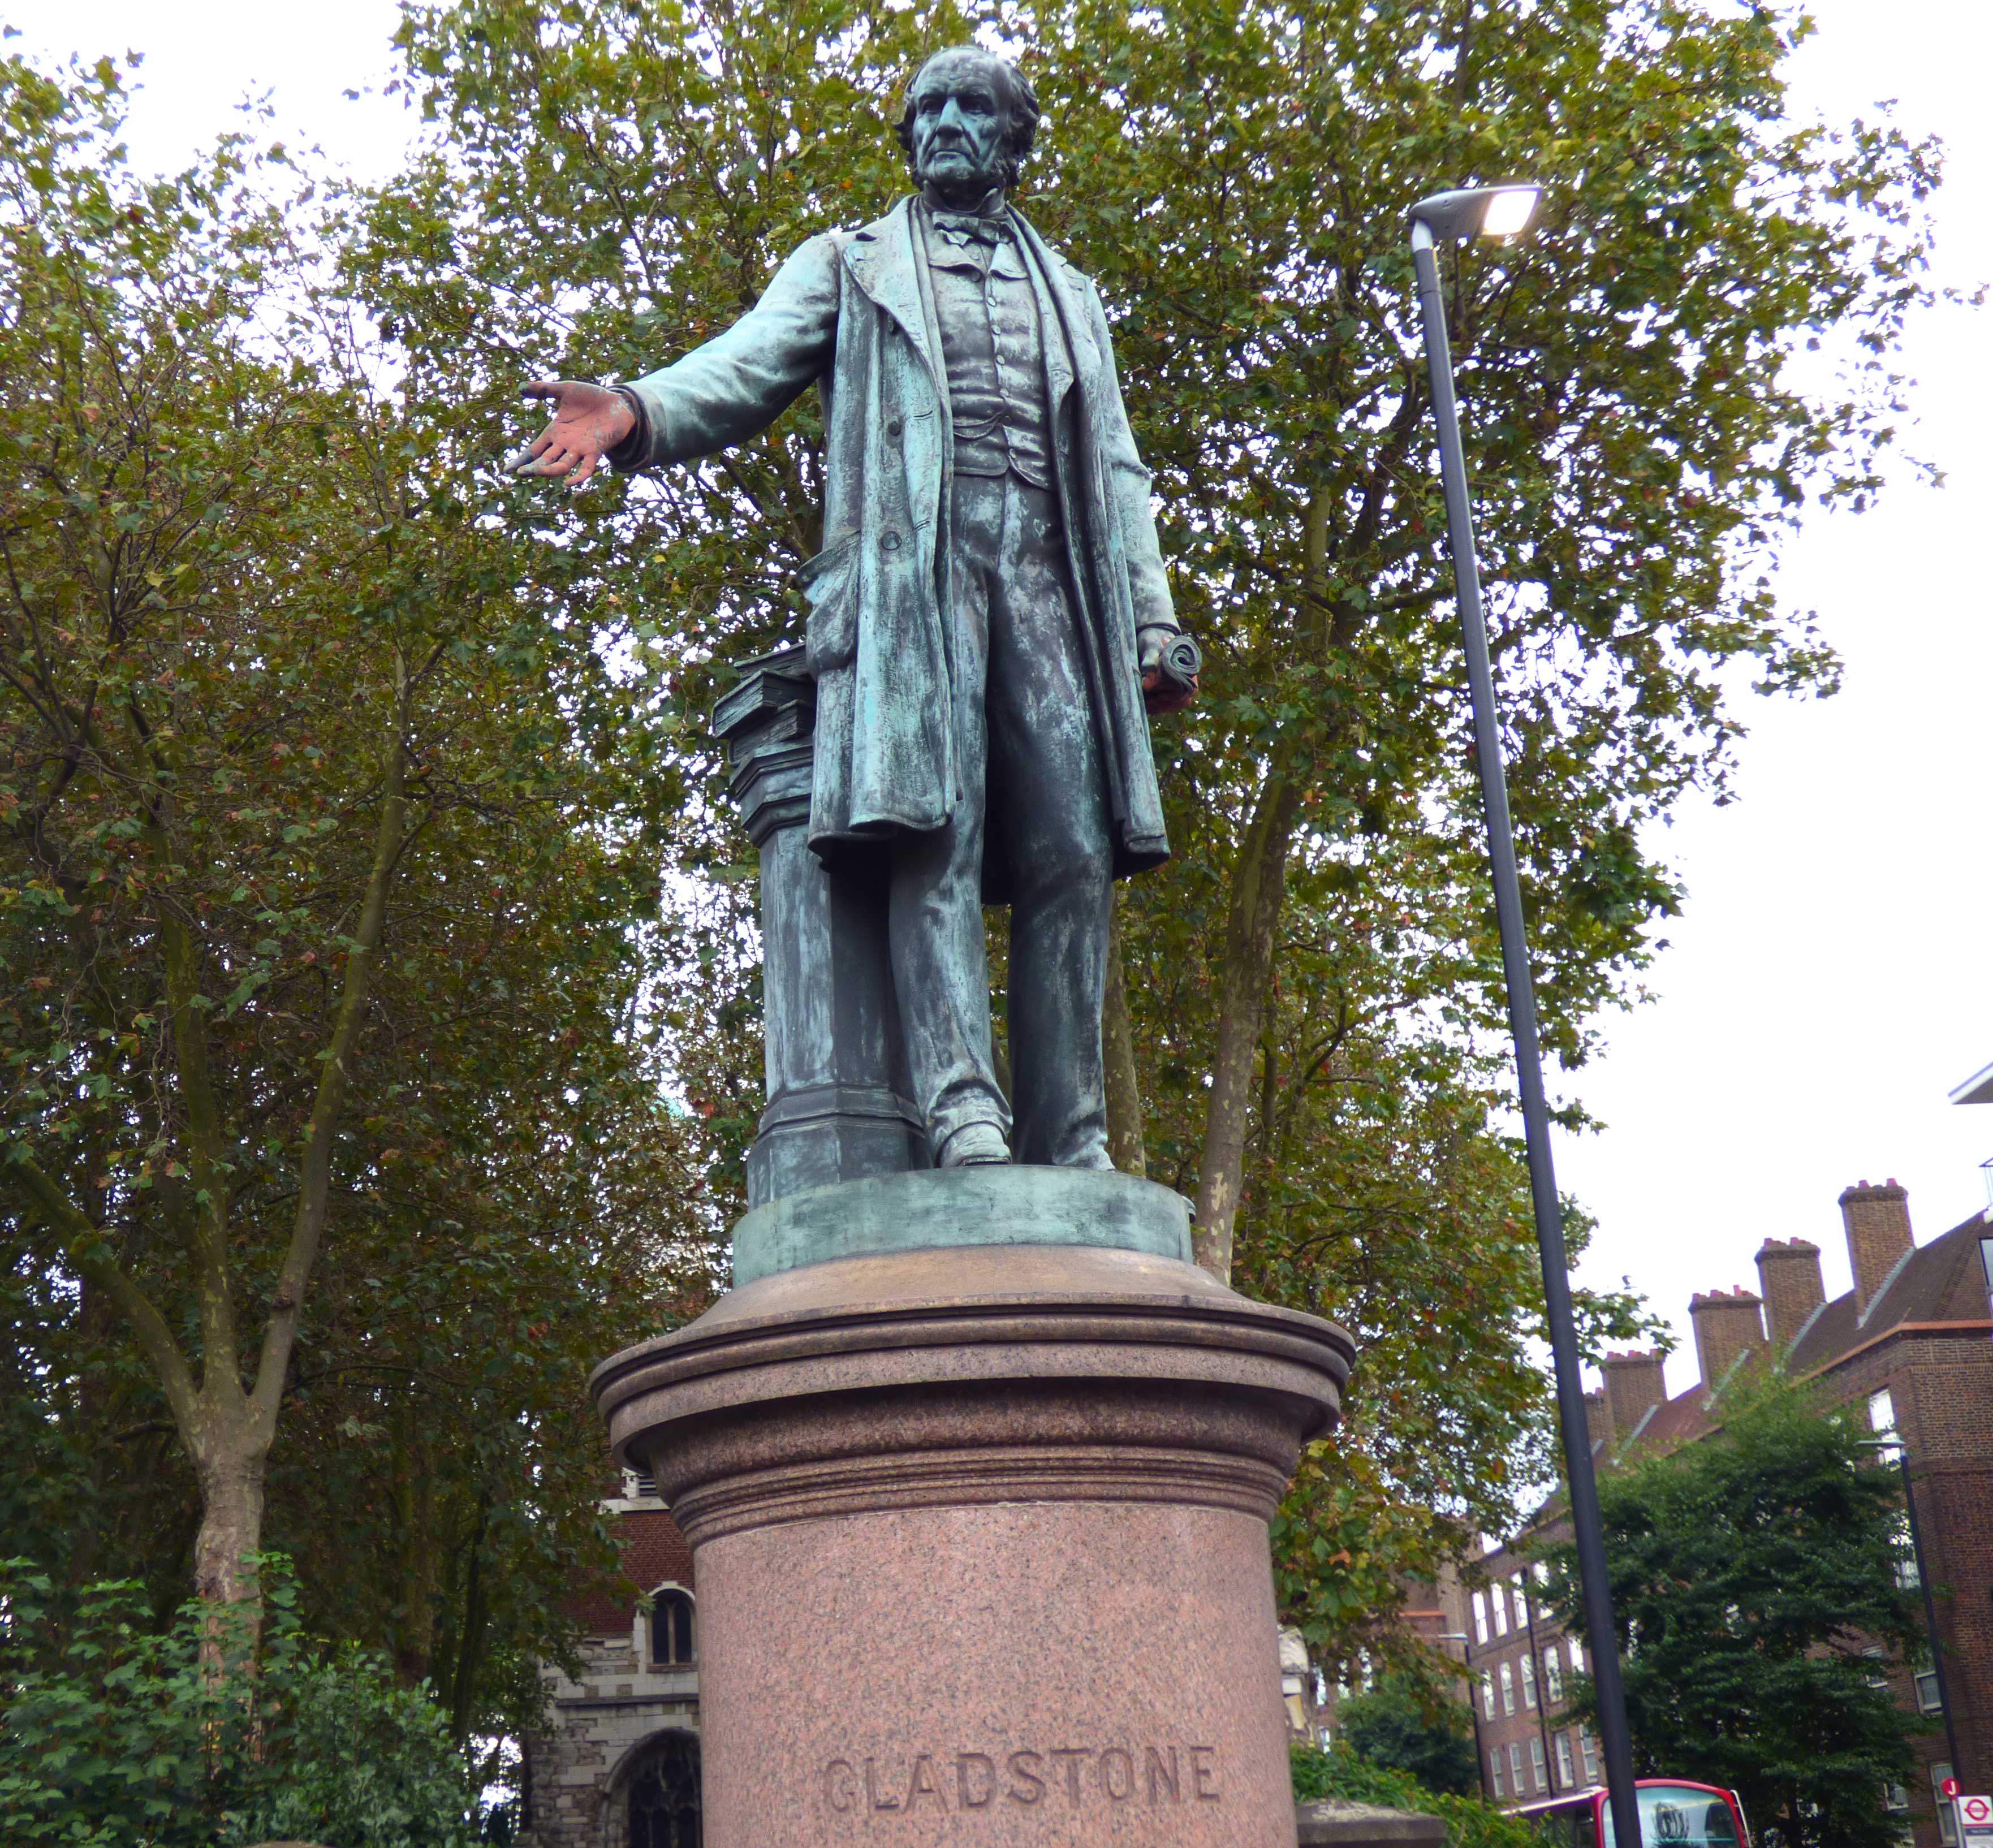 A photograph of the Gladstone Statue at Bow Church.